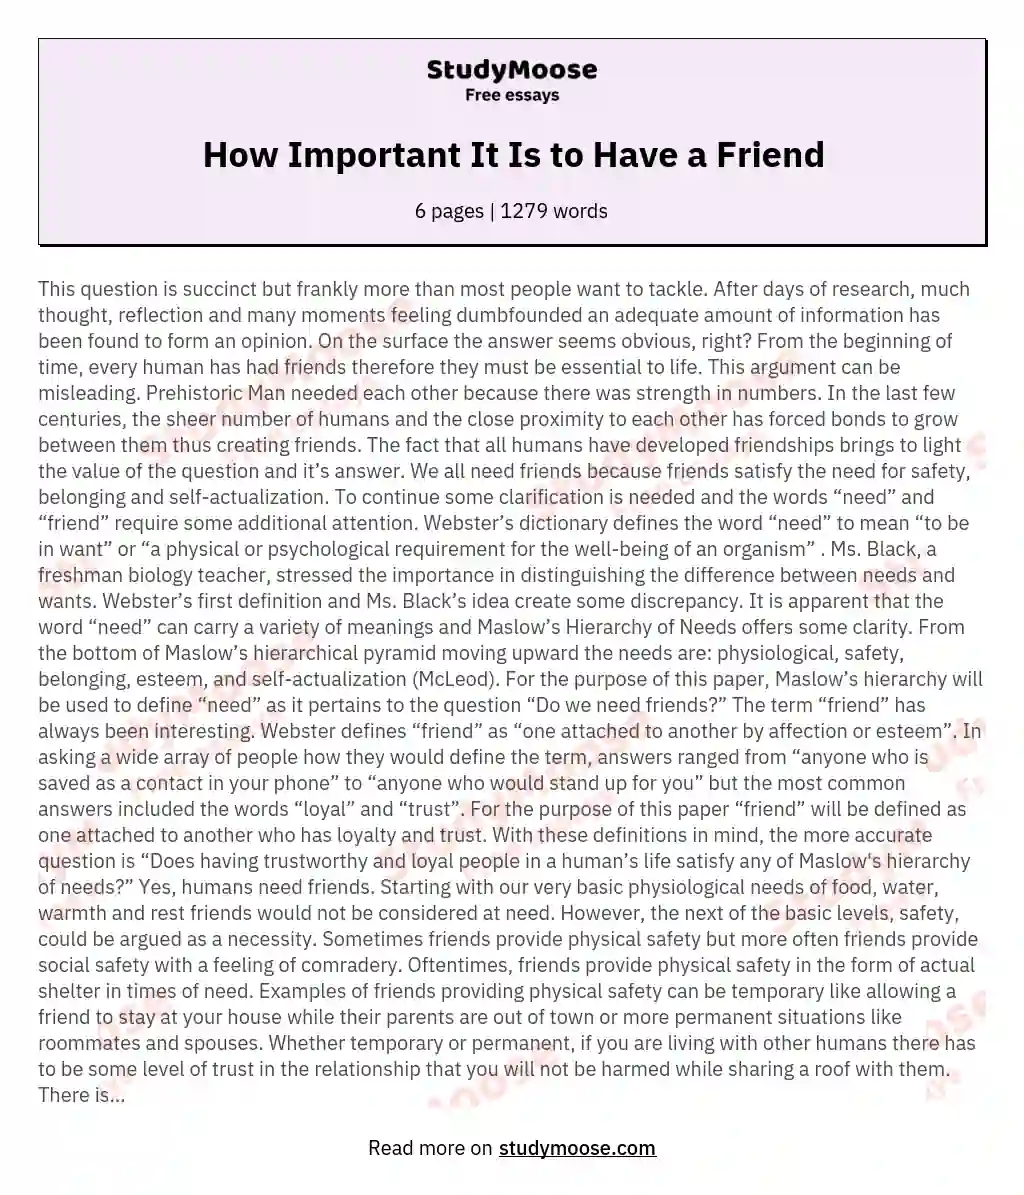 How Important It Is to Have a Friend essay